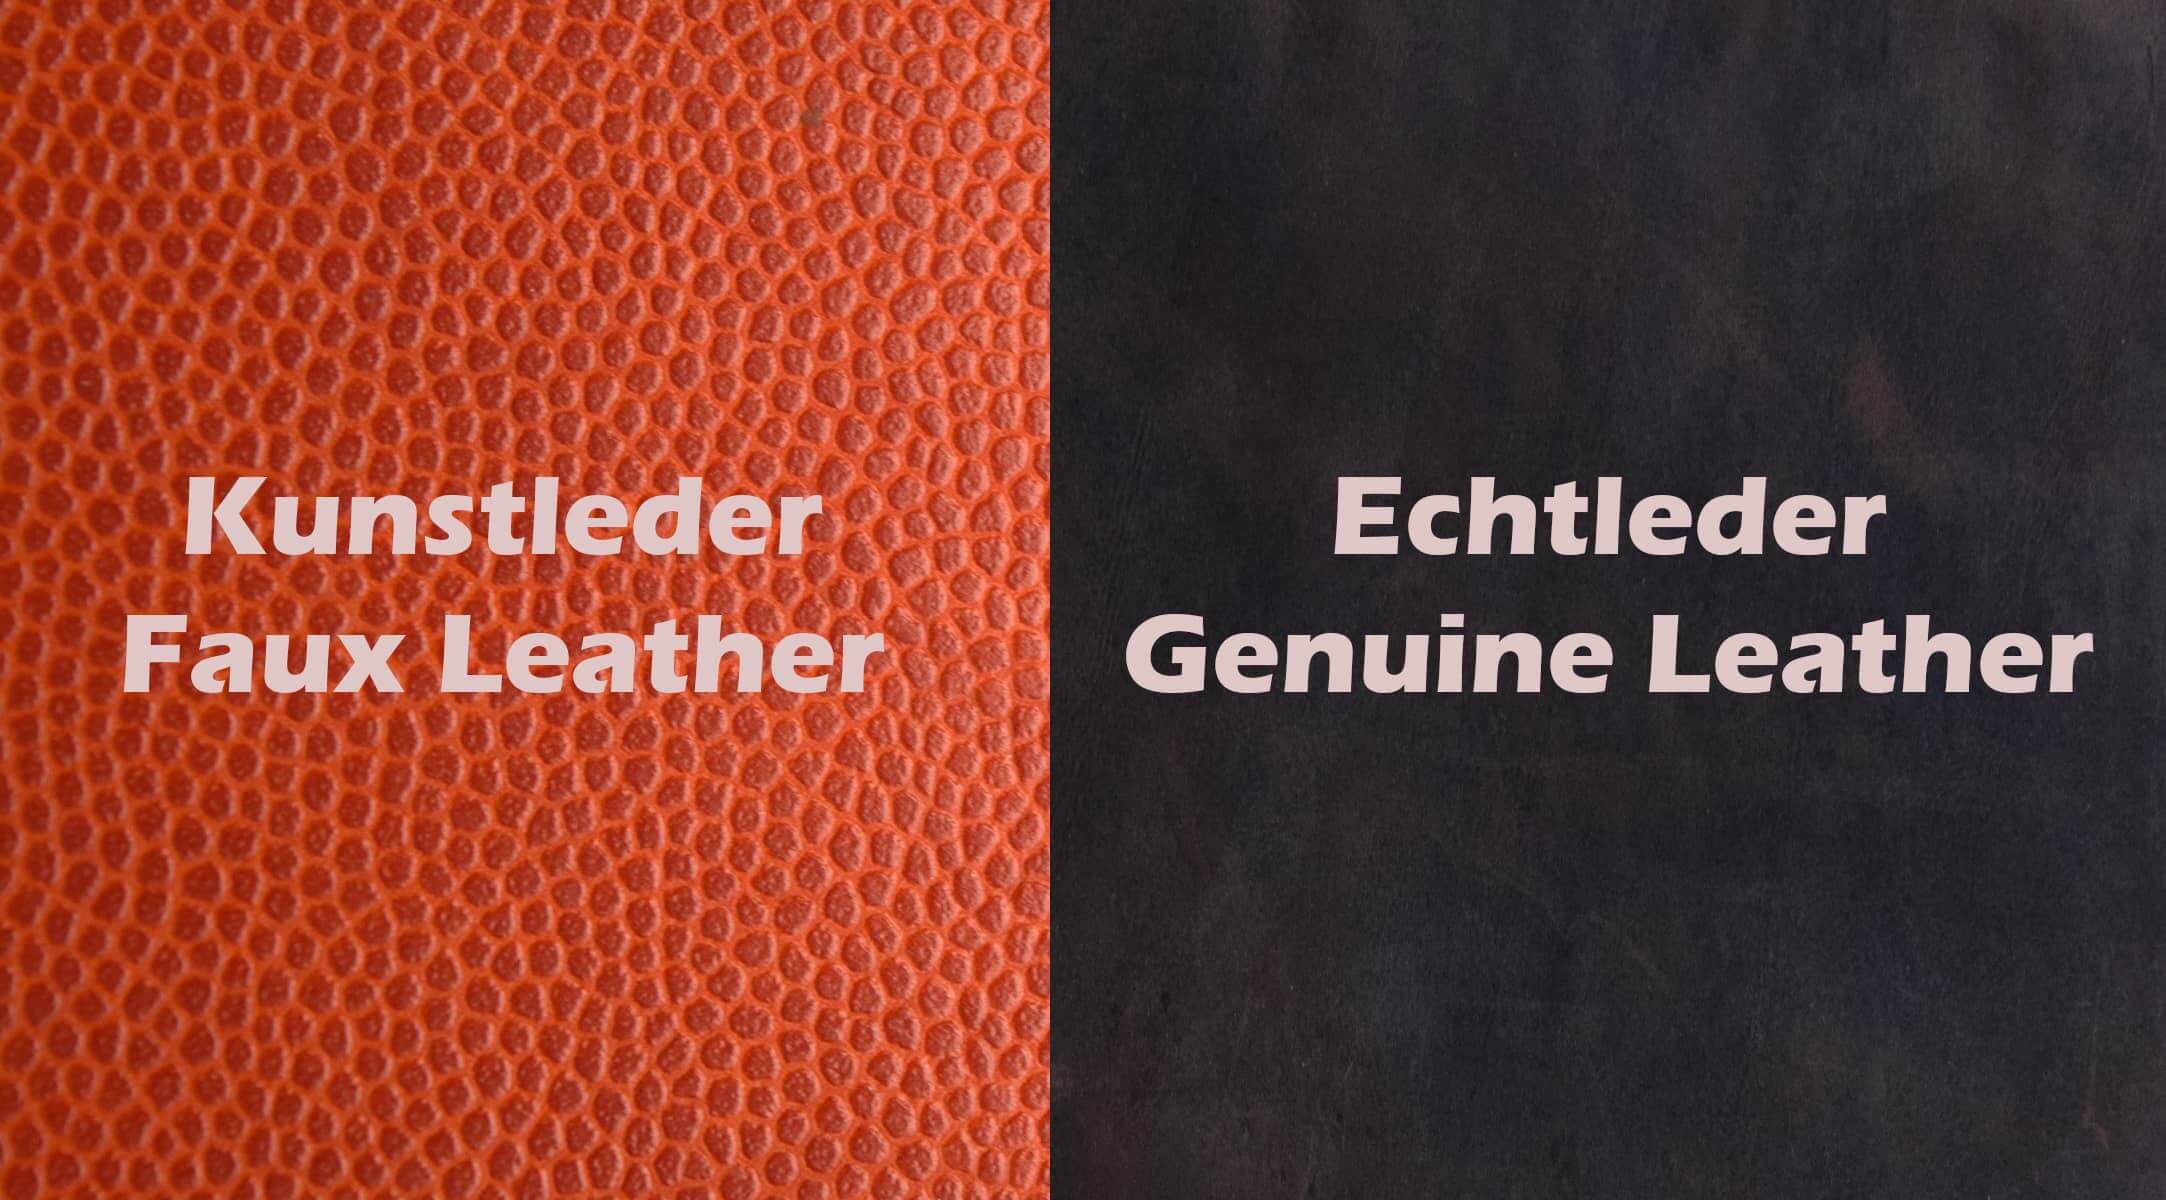 Real Leather vs Faux Leather: Comparison, Pros & Cons